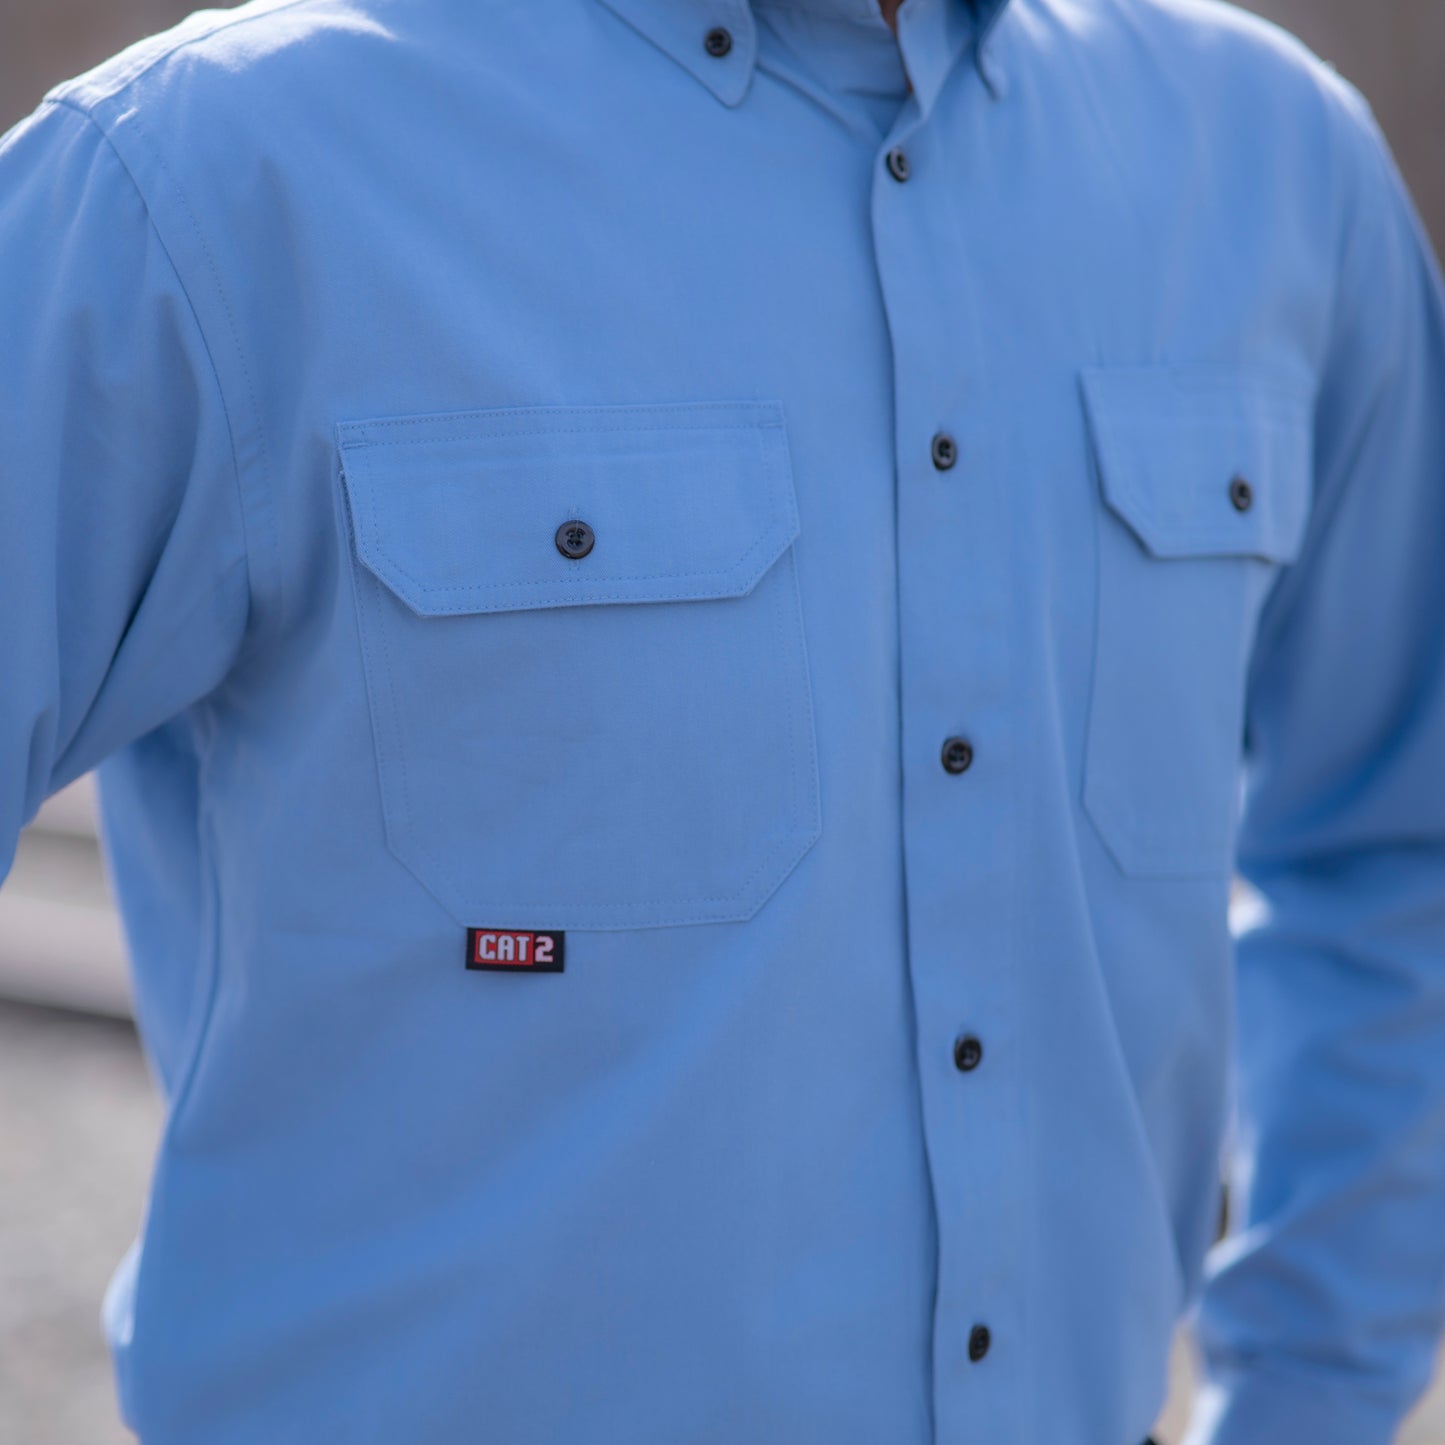 Close up image of MWG COMFORT WEAVE Uniform Shirt in light blue. MWG FR shirt has black buttons and two large chest pockets with flap closures. Image displays CAT 2 identification, symbolizing level of flame-resistance.